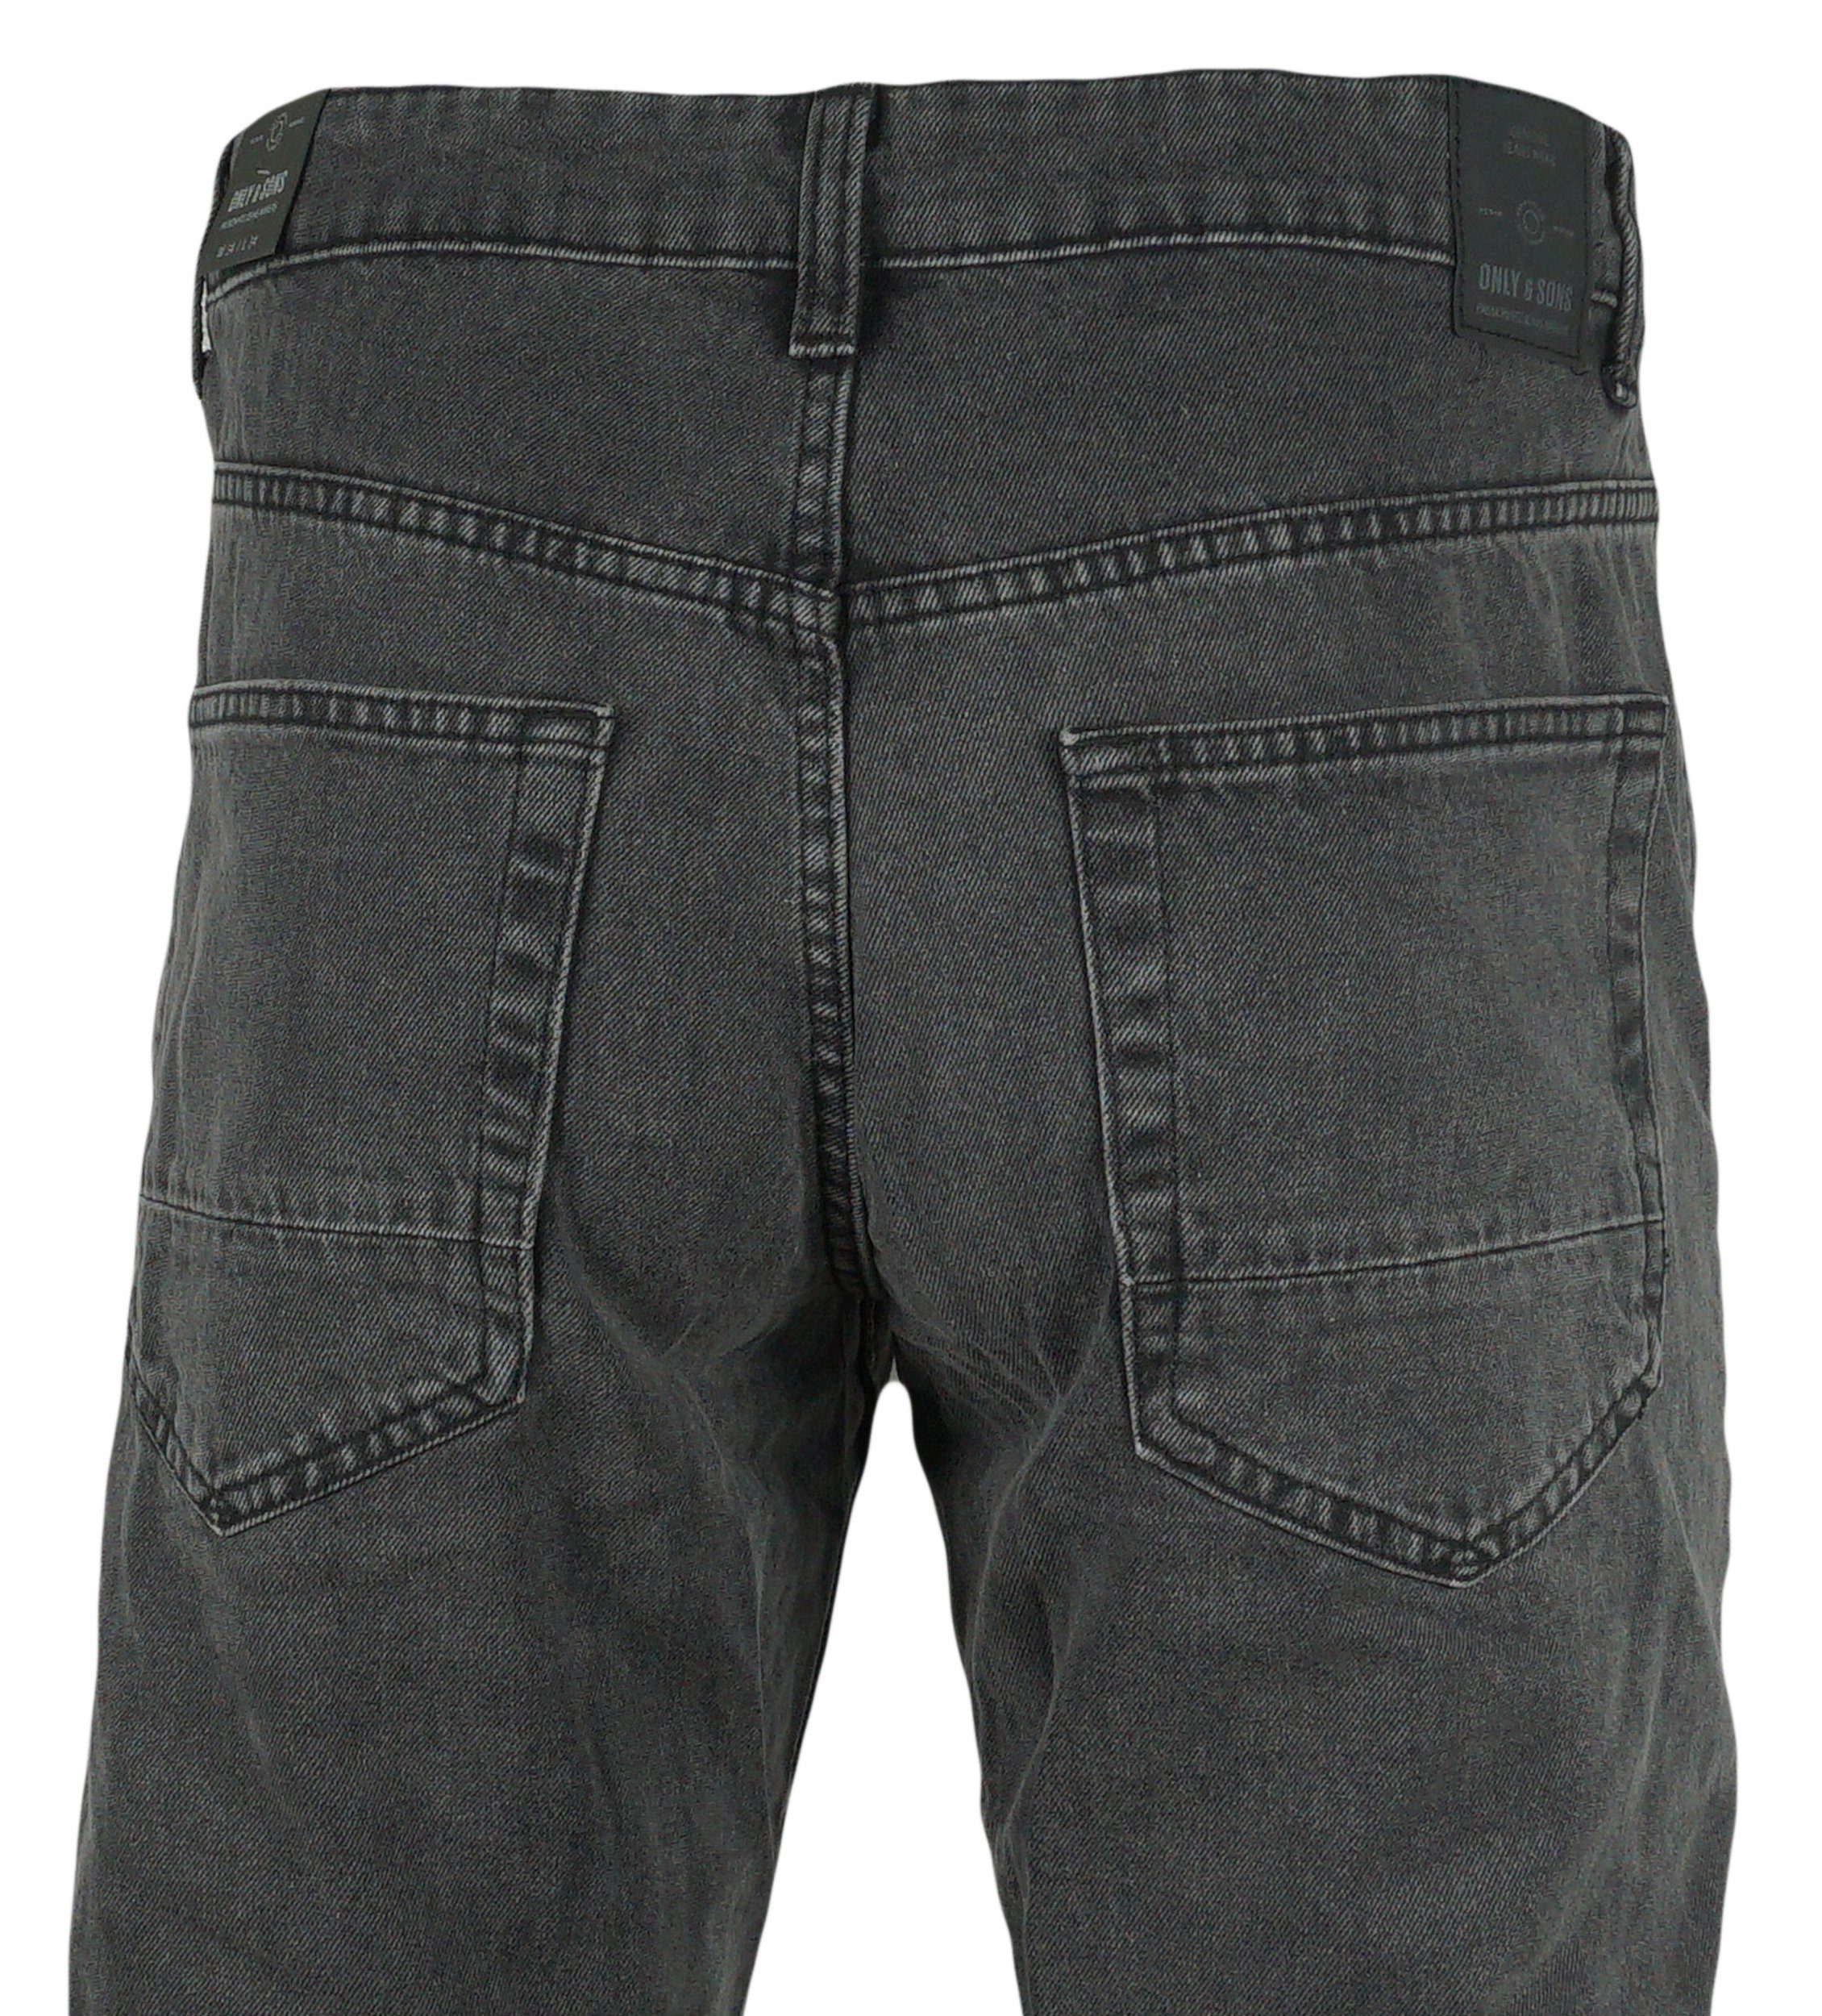 & Jeans Sons Only & 5-Pocket-Jeans ONLY SONS